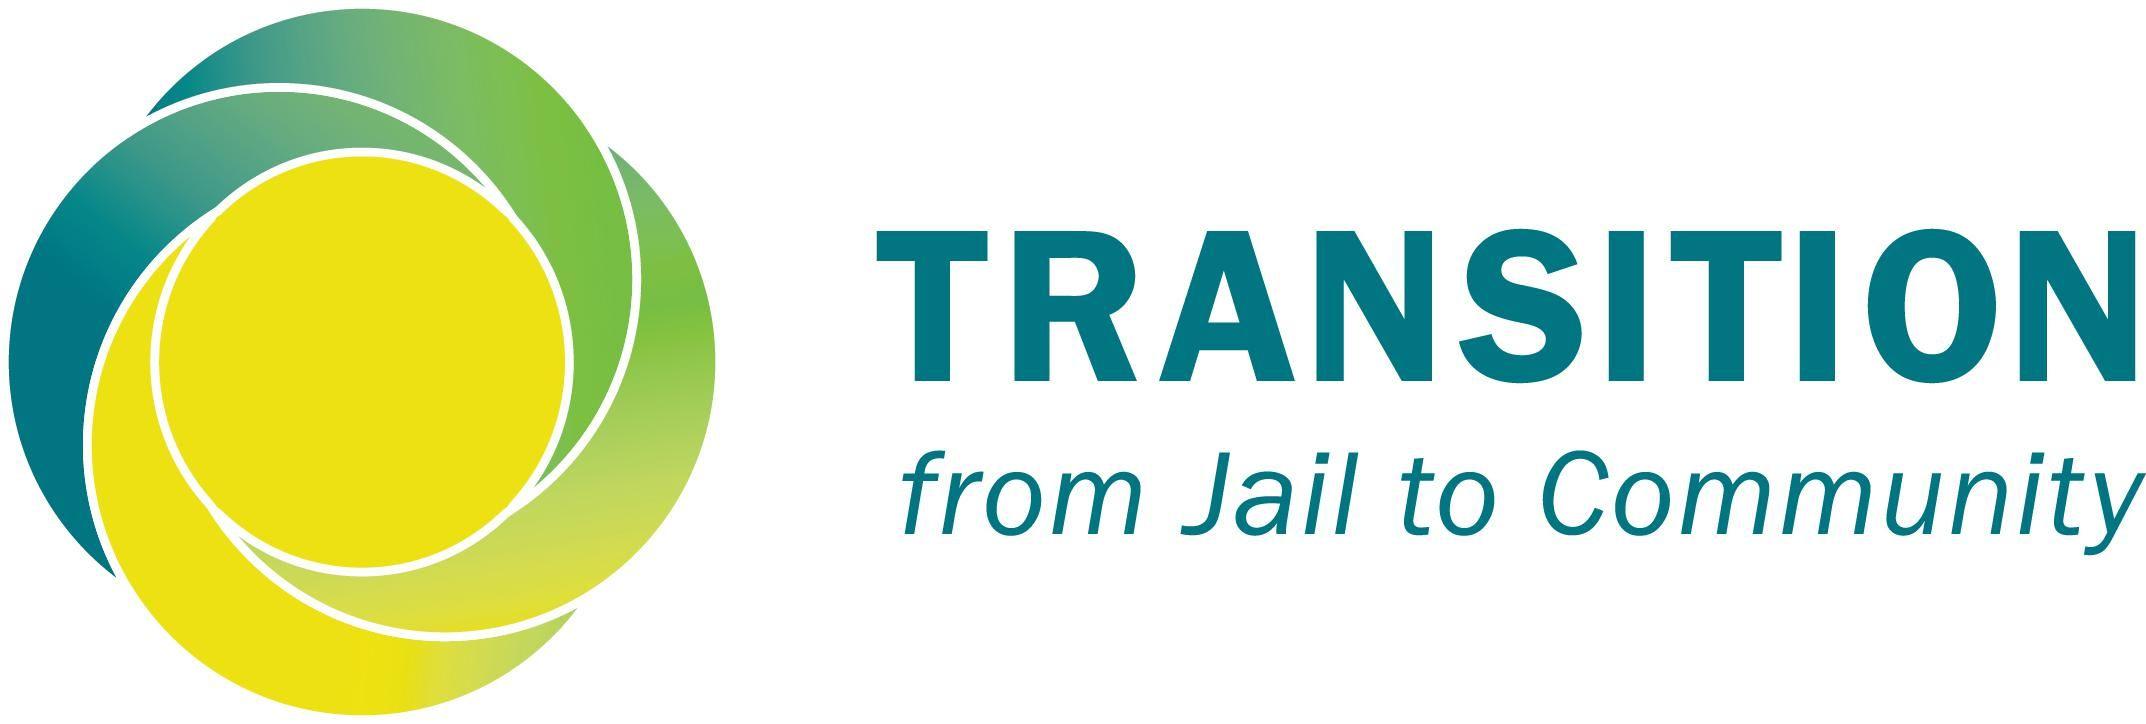 TJC Logo - Transition from Jail to Community (TJC) | National Institute of ...